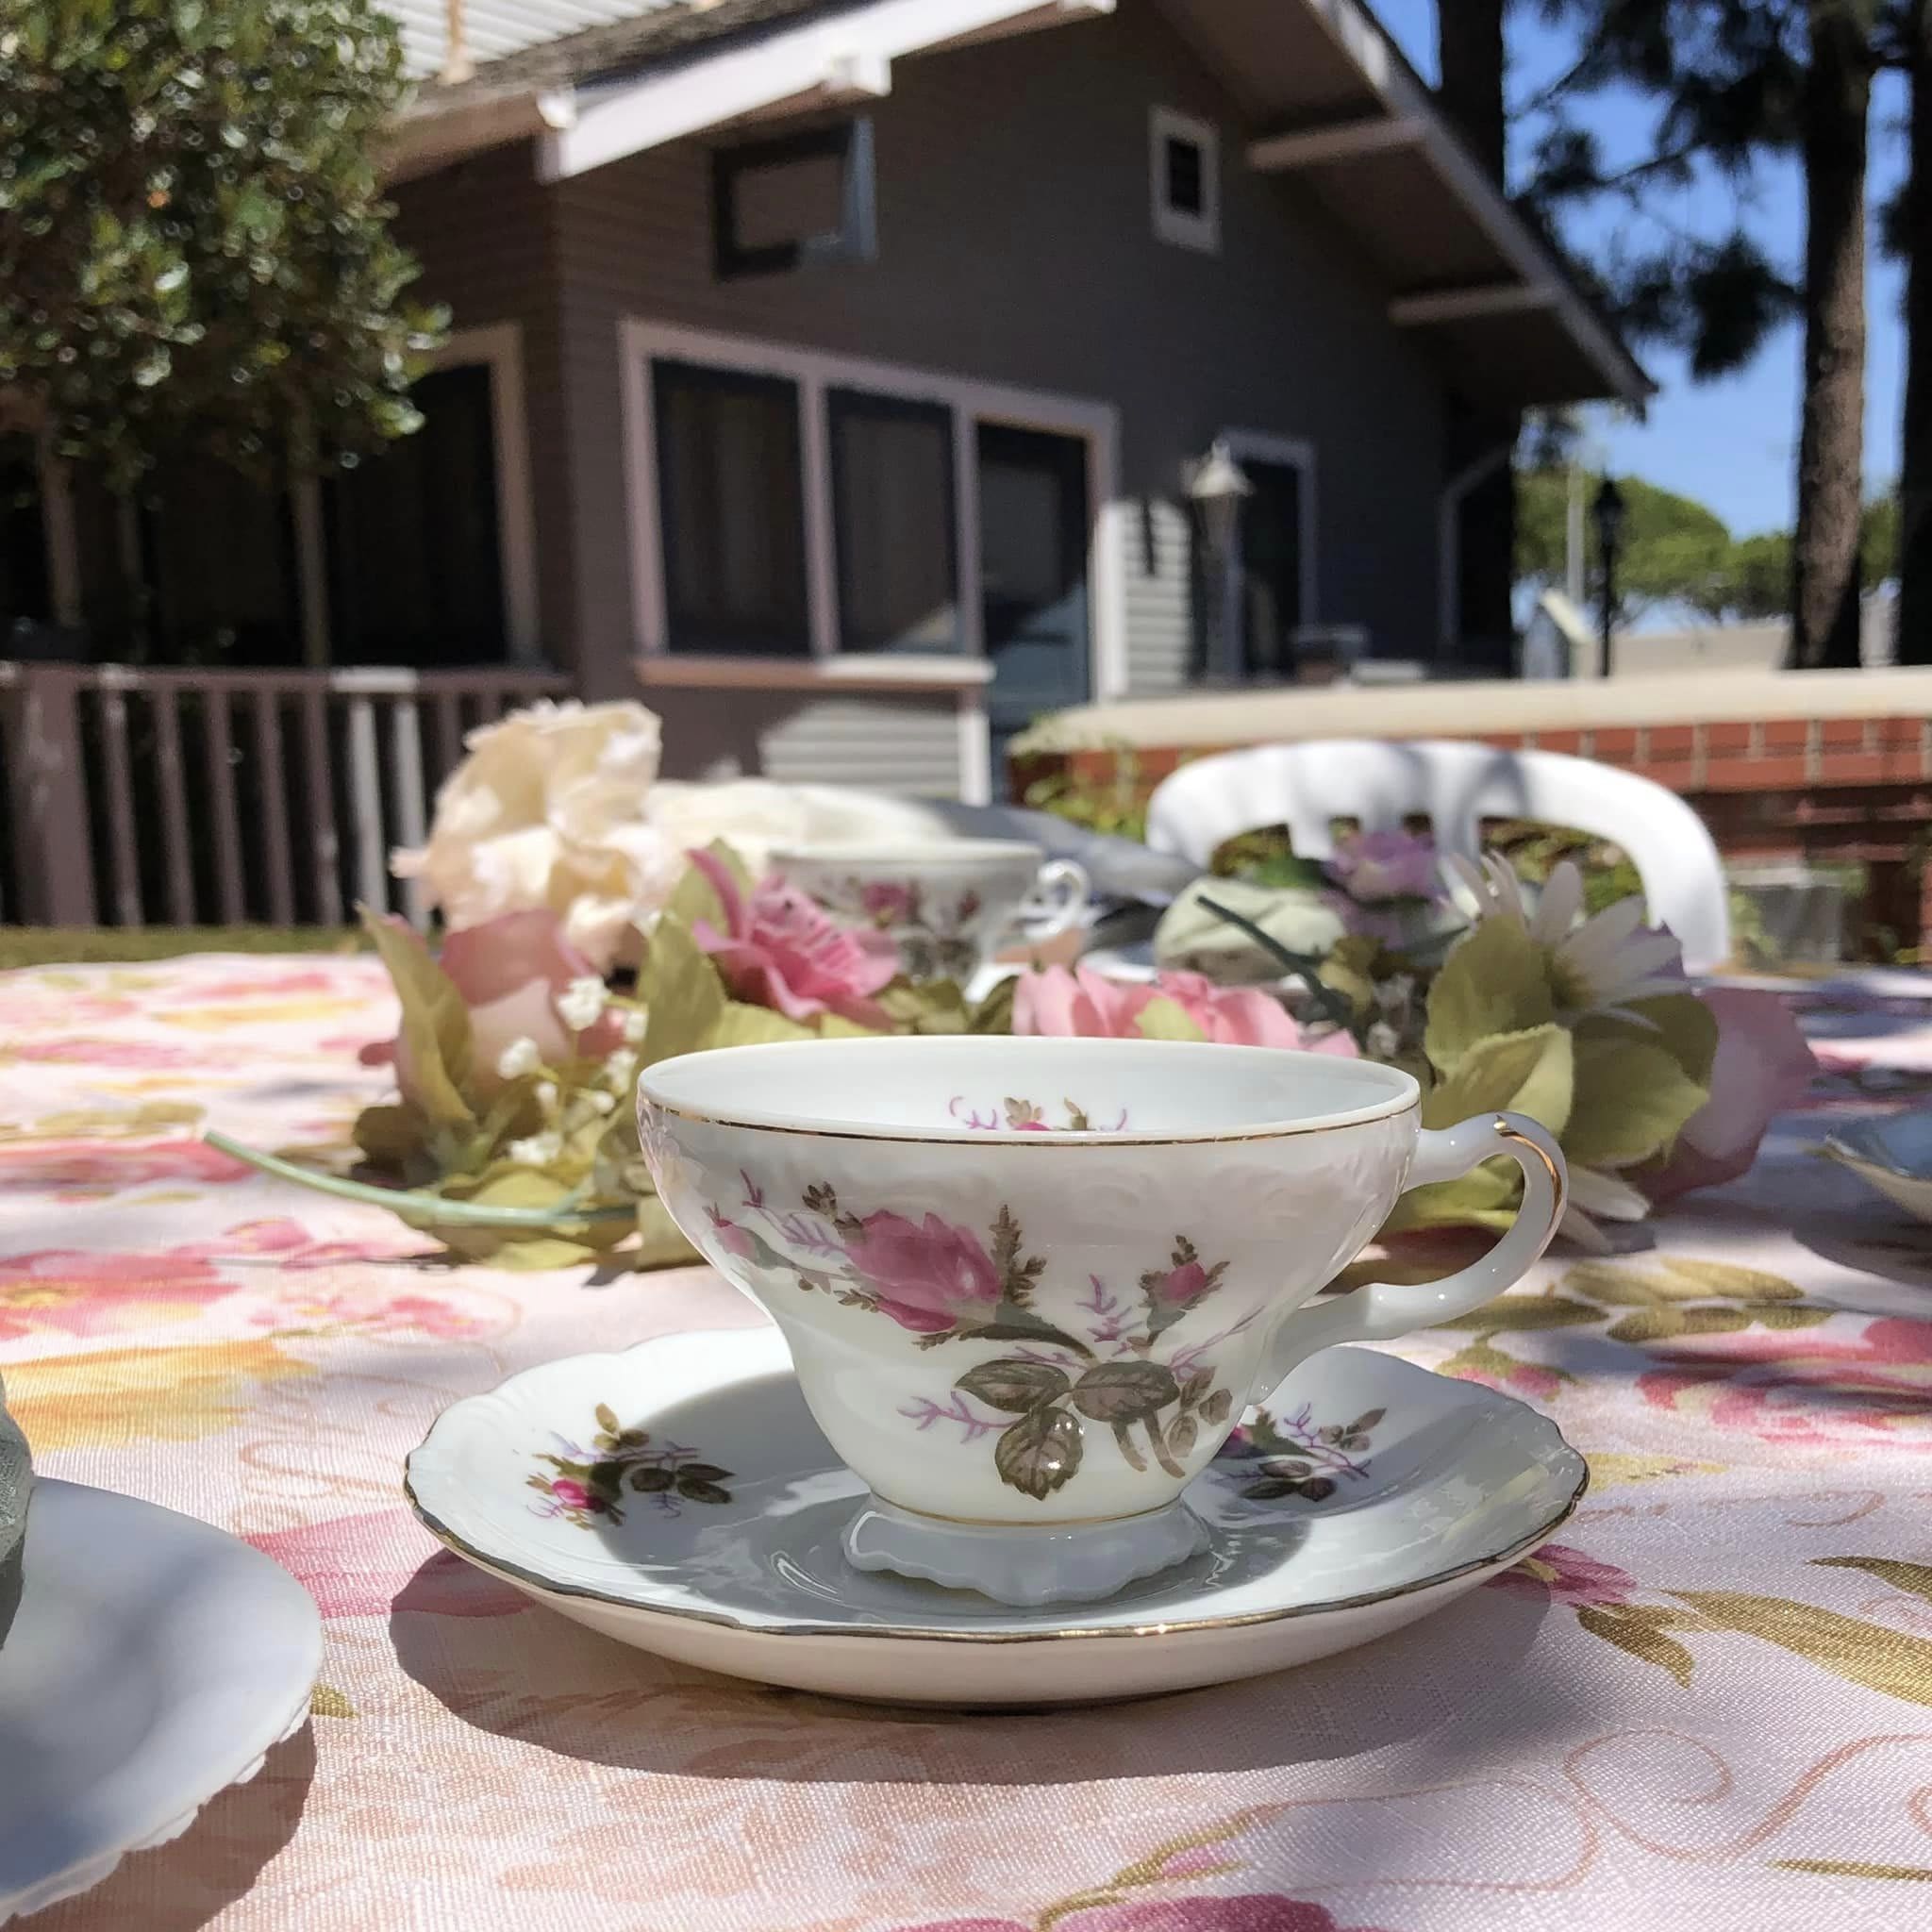 A porcelain teacup with floral design on a saucer, set on a table with a flower-patterned tablecloth, in an outdoor setting at Heritage Square with a house and trees in the background